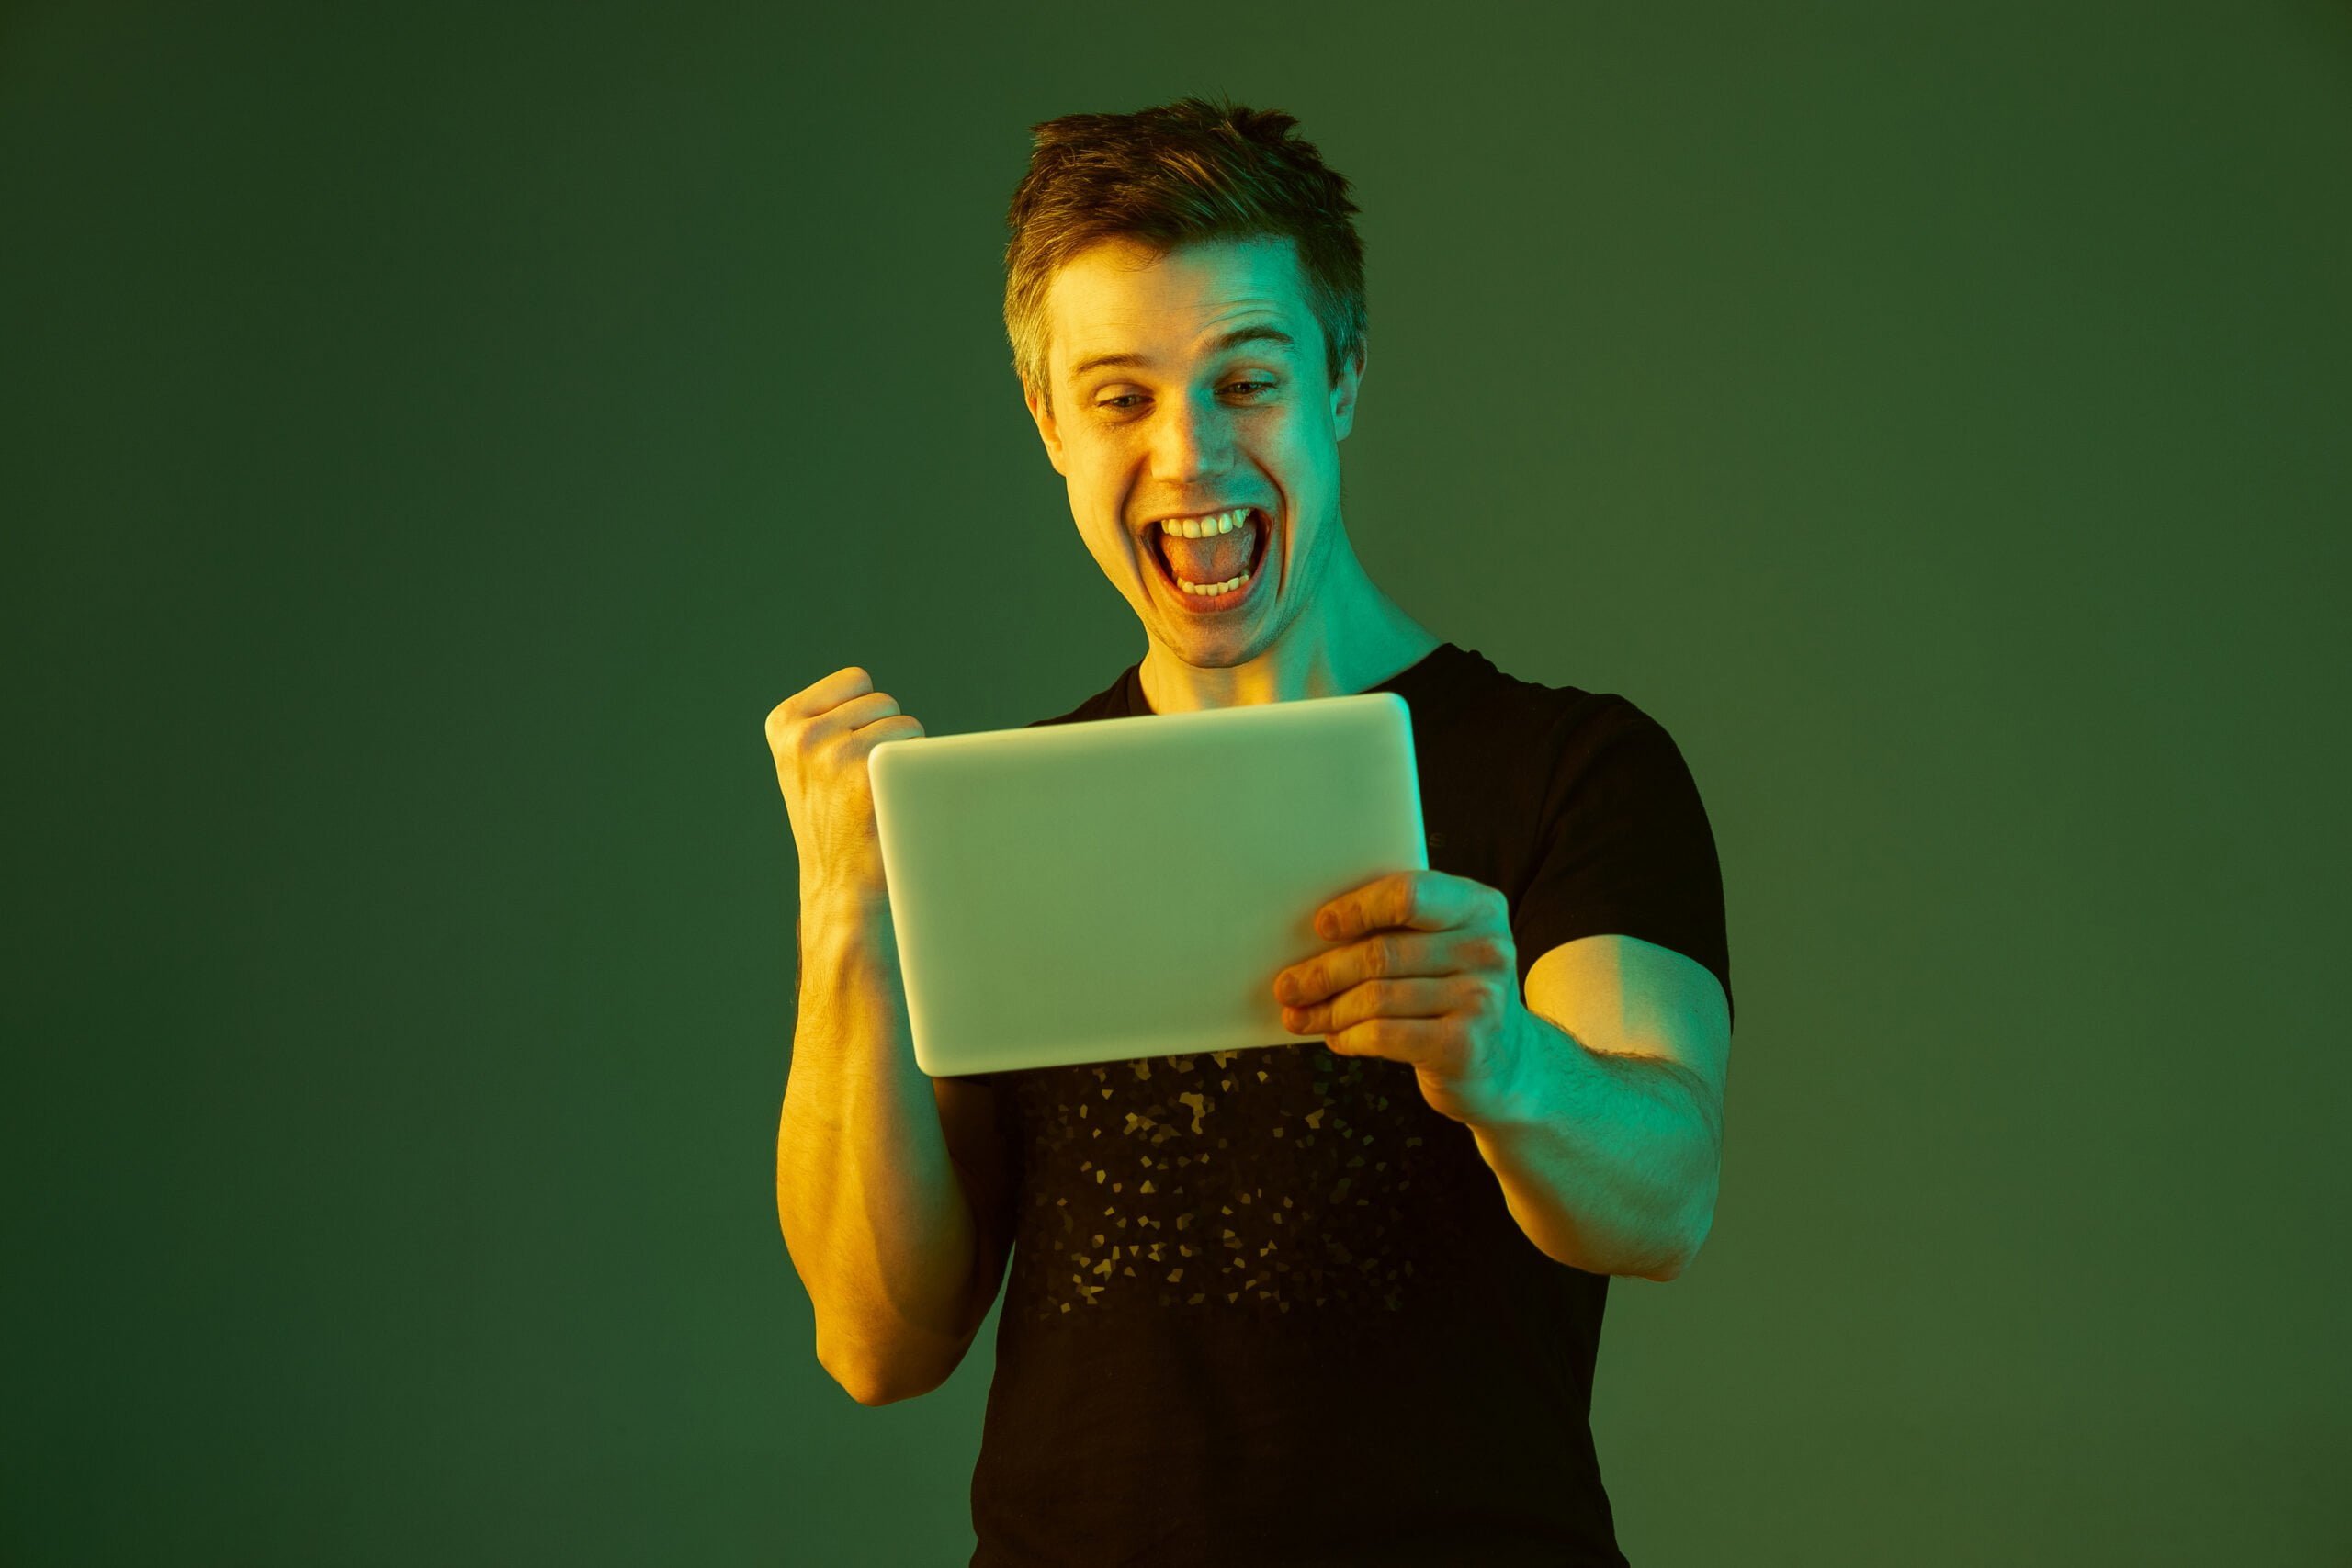 holding tablet celebrating win bet game caucasian man s portrait green studio background neon light beautiful male model concept human emotions facial expression sales ad scaled 1